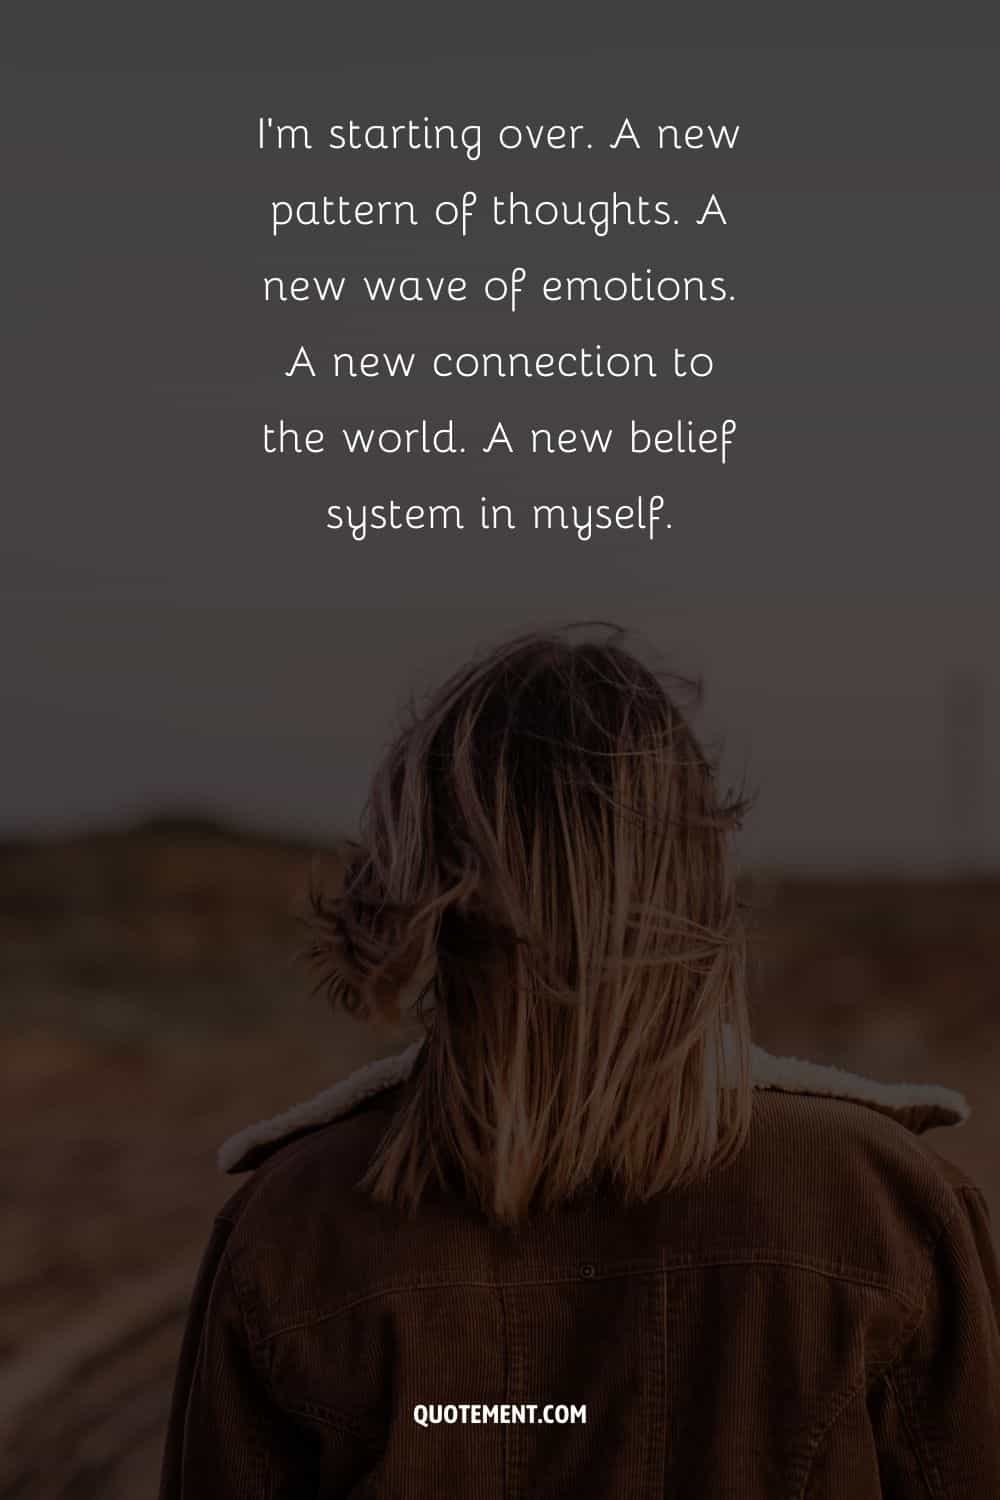 “I’m starting over. A new pattern of thoughts. A new wave of emotions. A new connection to the world. A new belief system in myself.” — Unknown